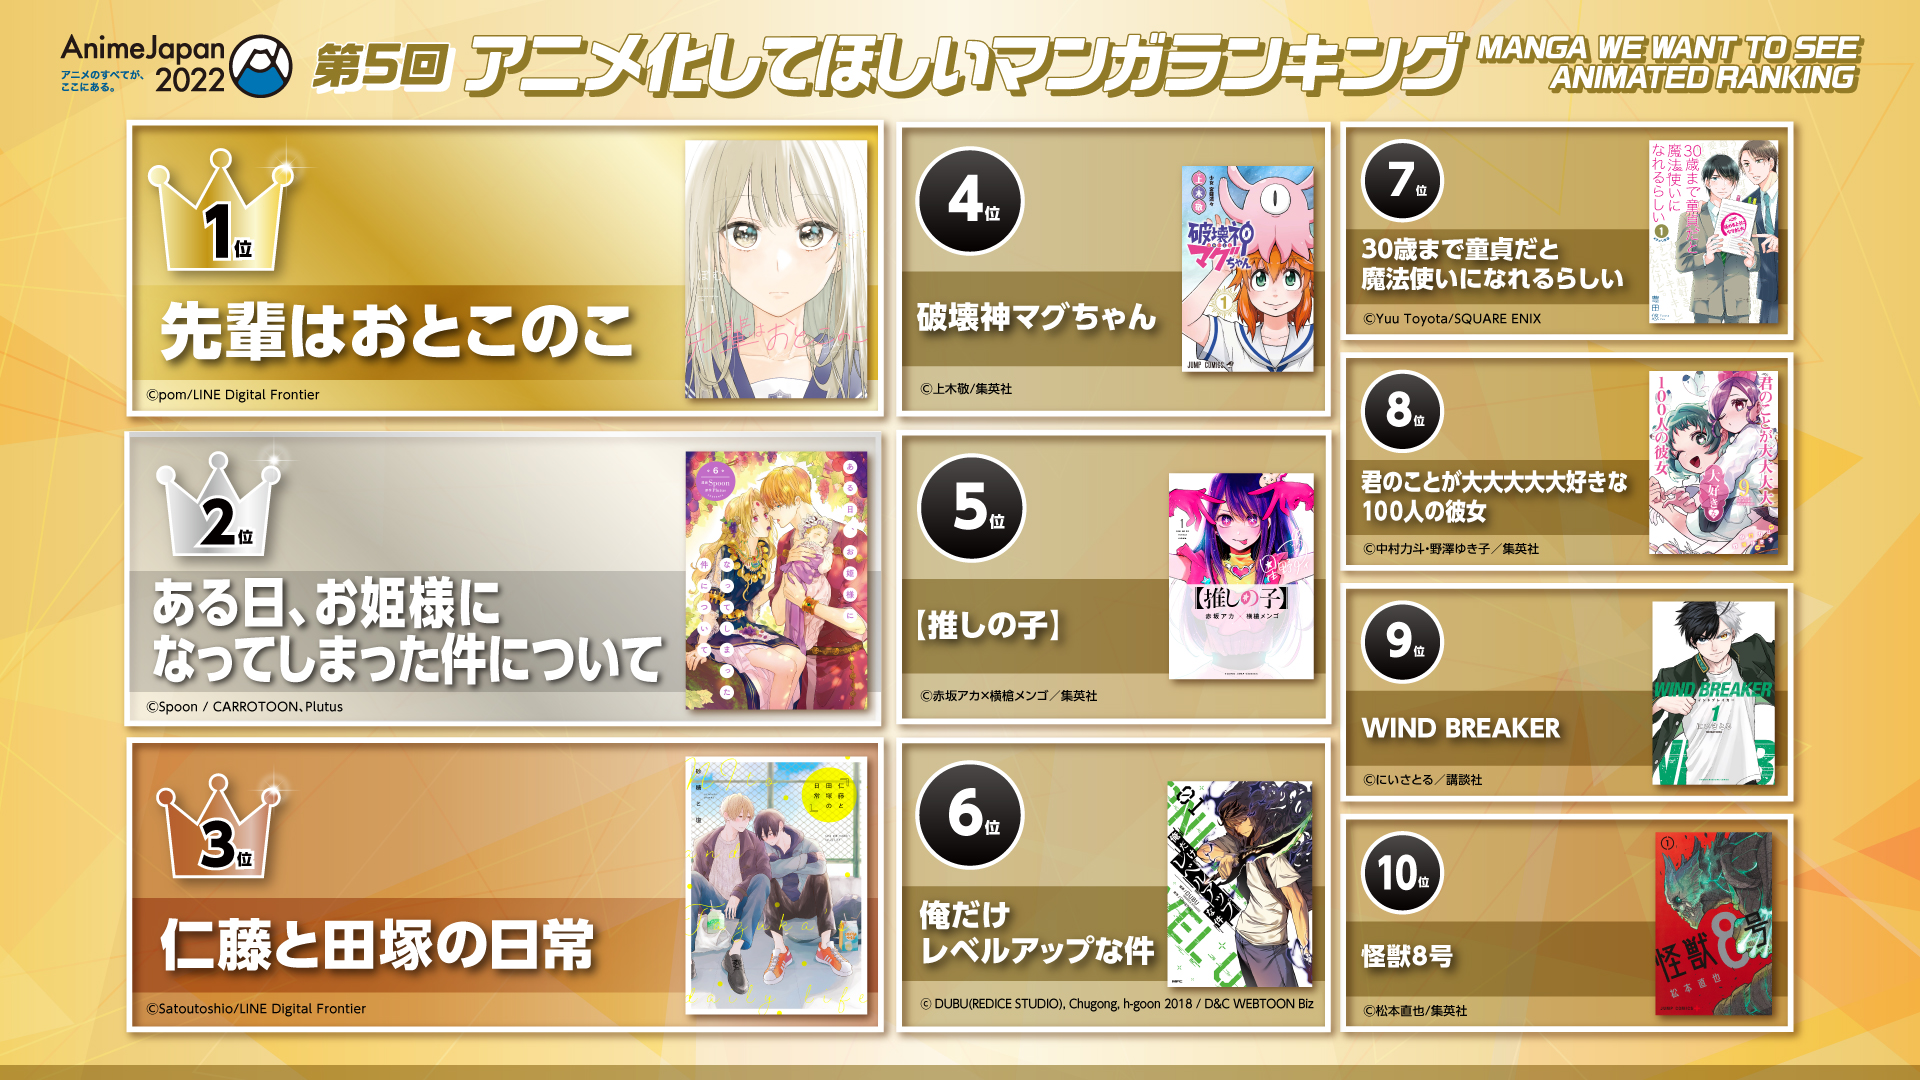 Crunchyroll - Anime Japan 2022 Polls the Top 10 Manga That Fans Want to See  Animated